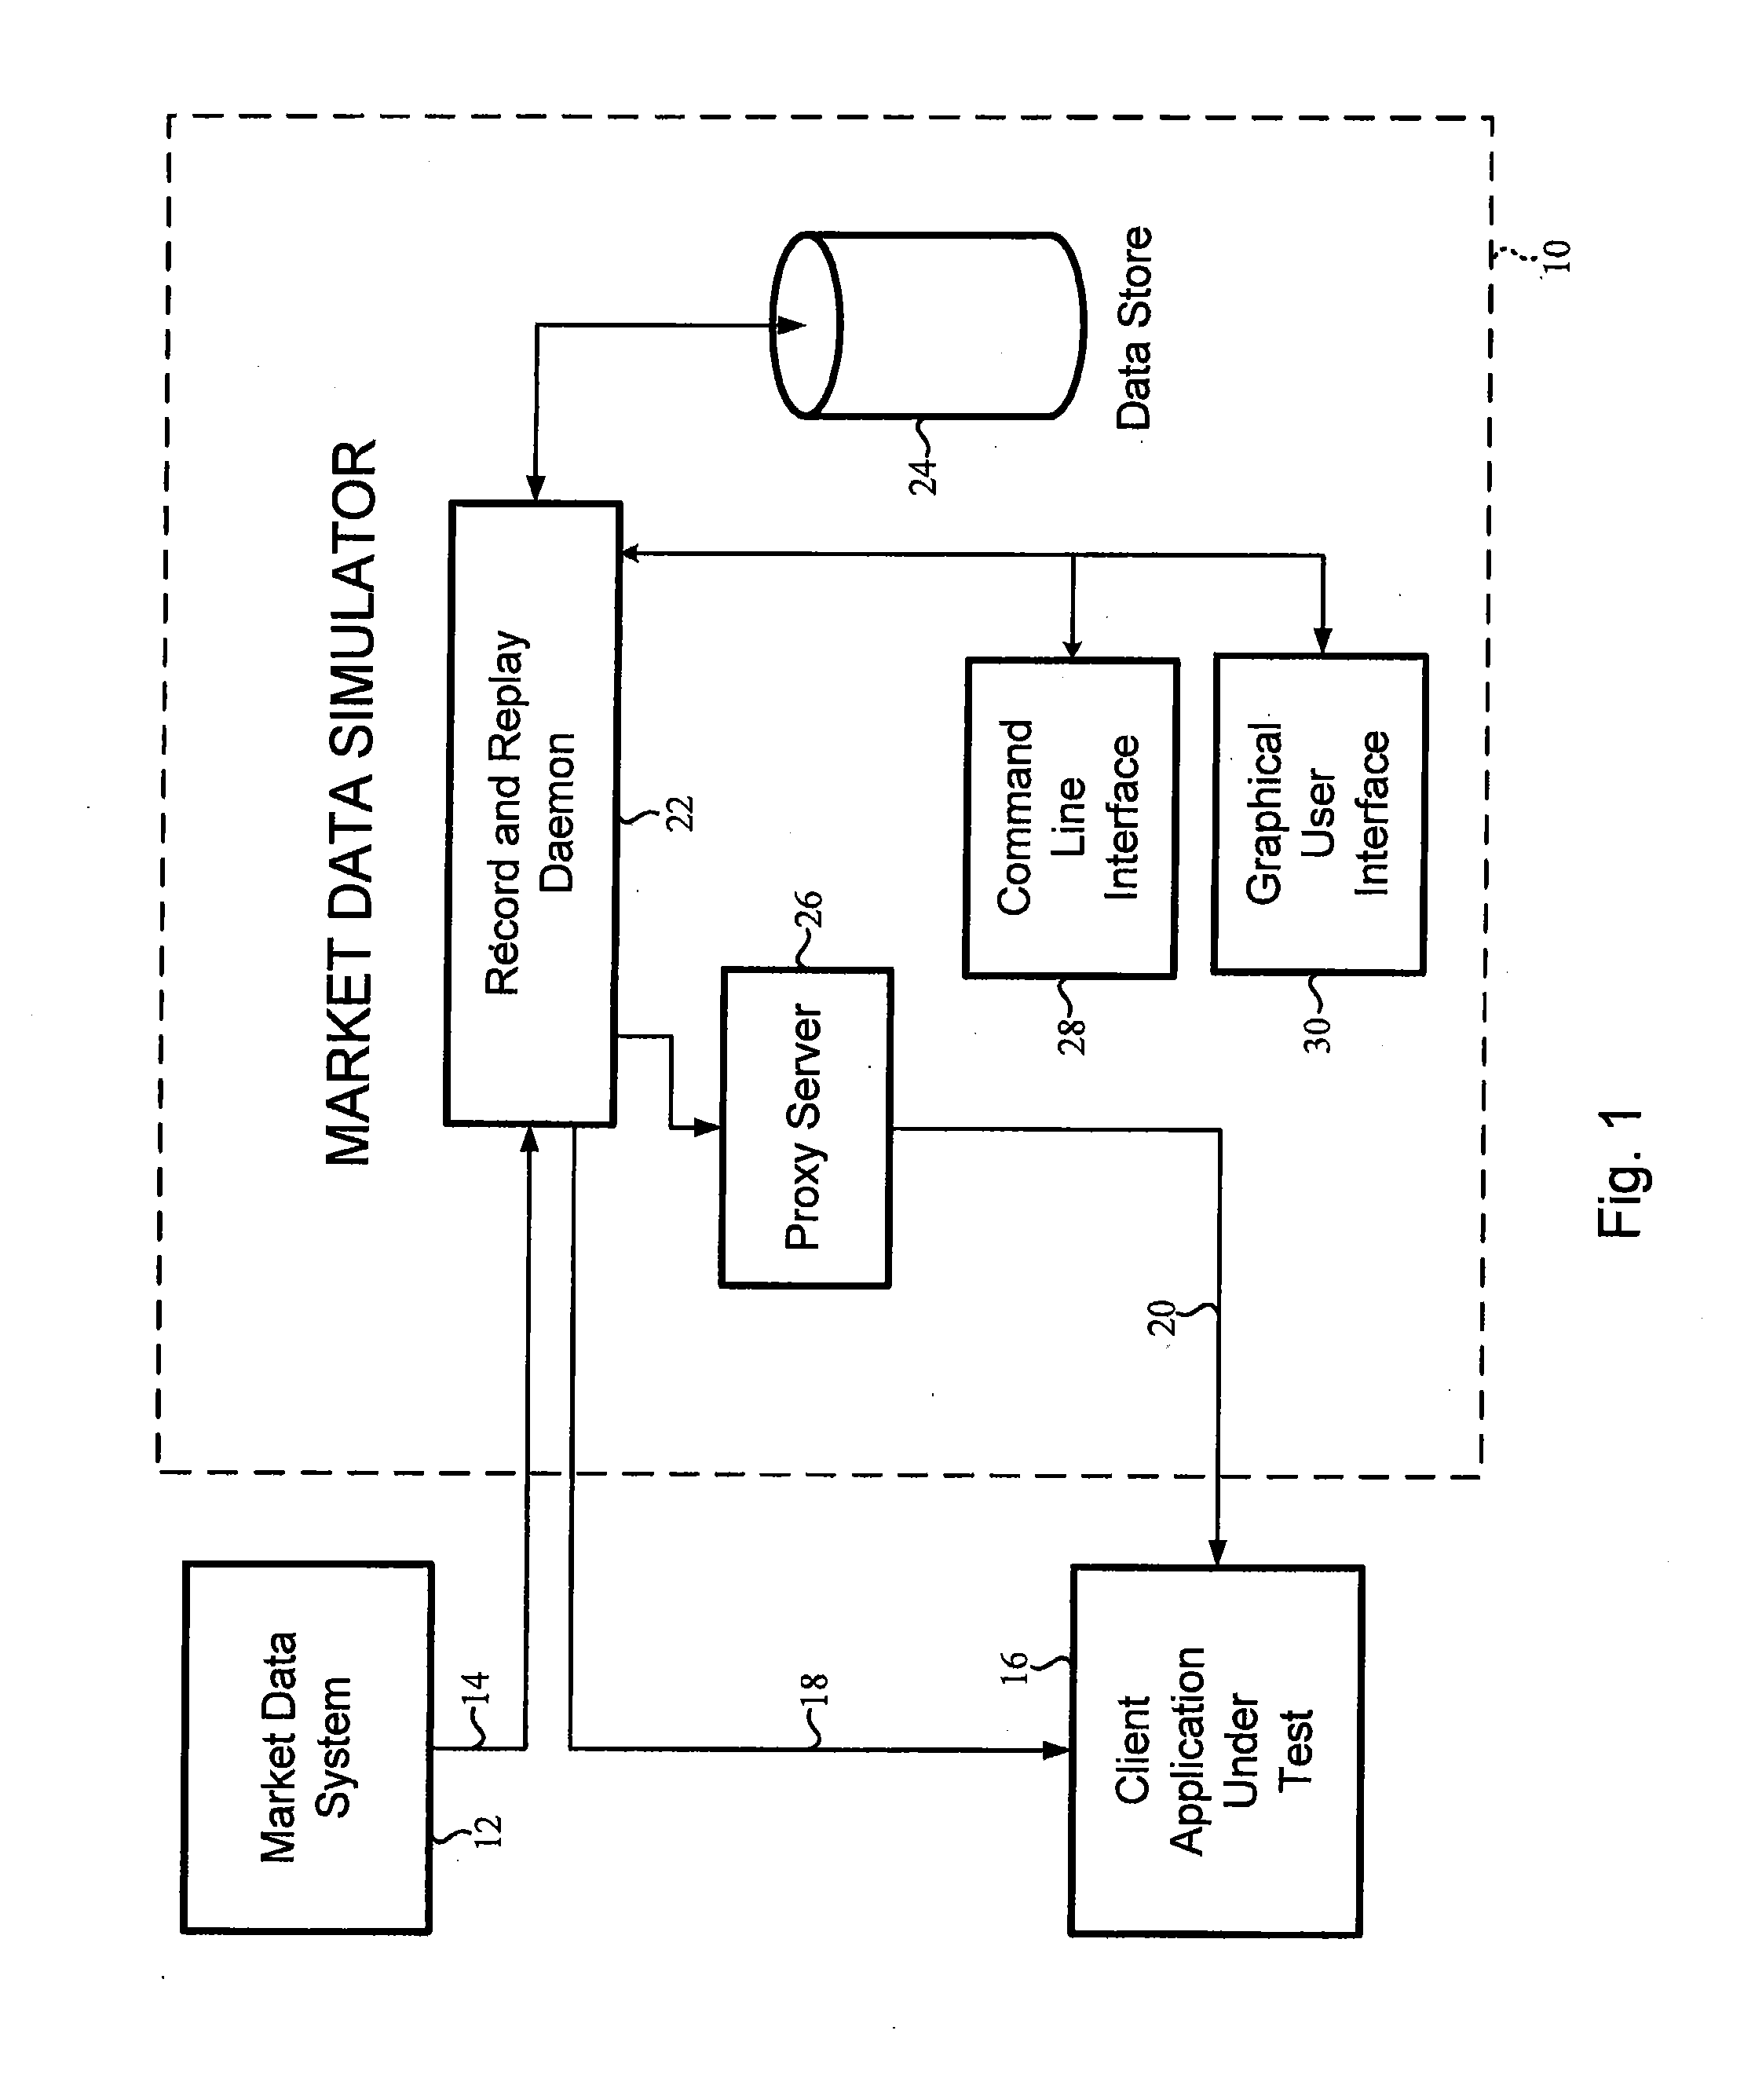 Method and system for developing and applying market data scenarios